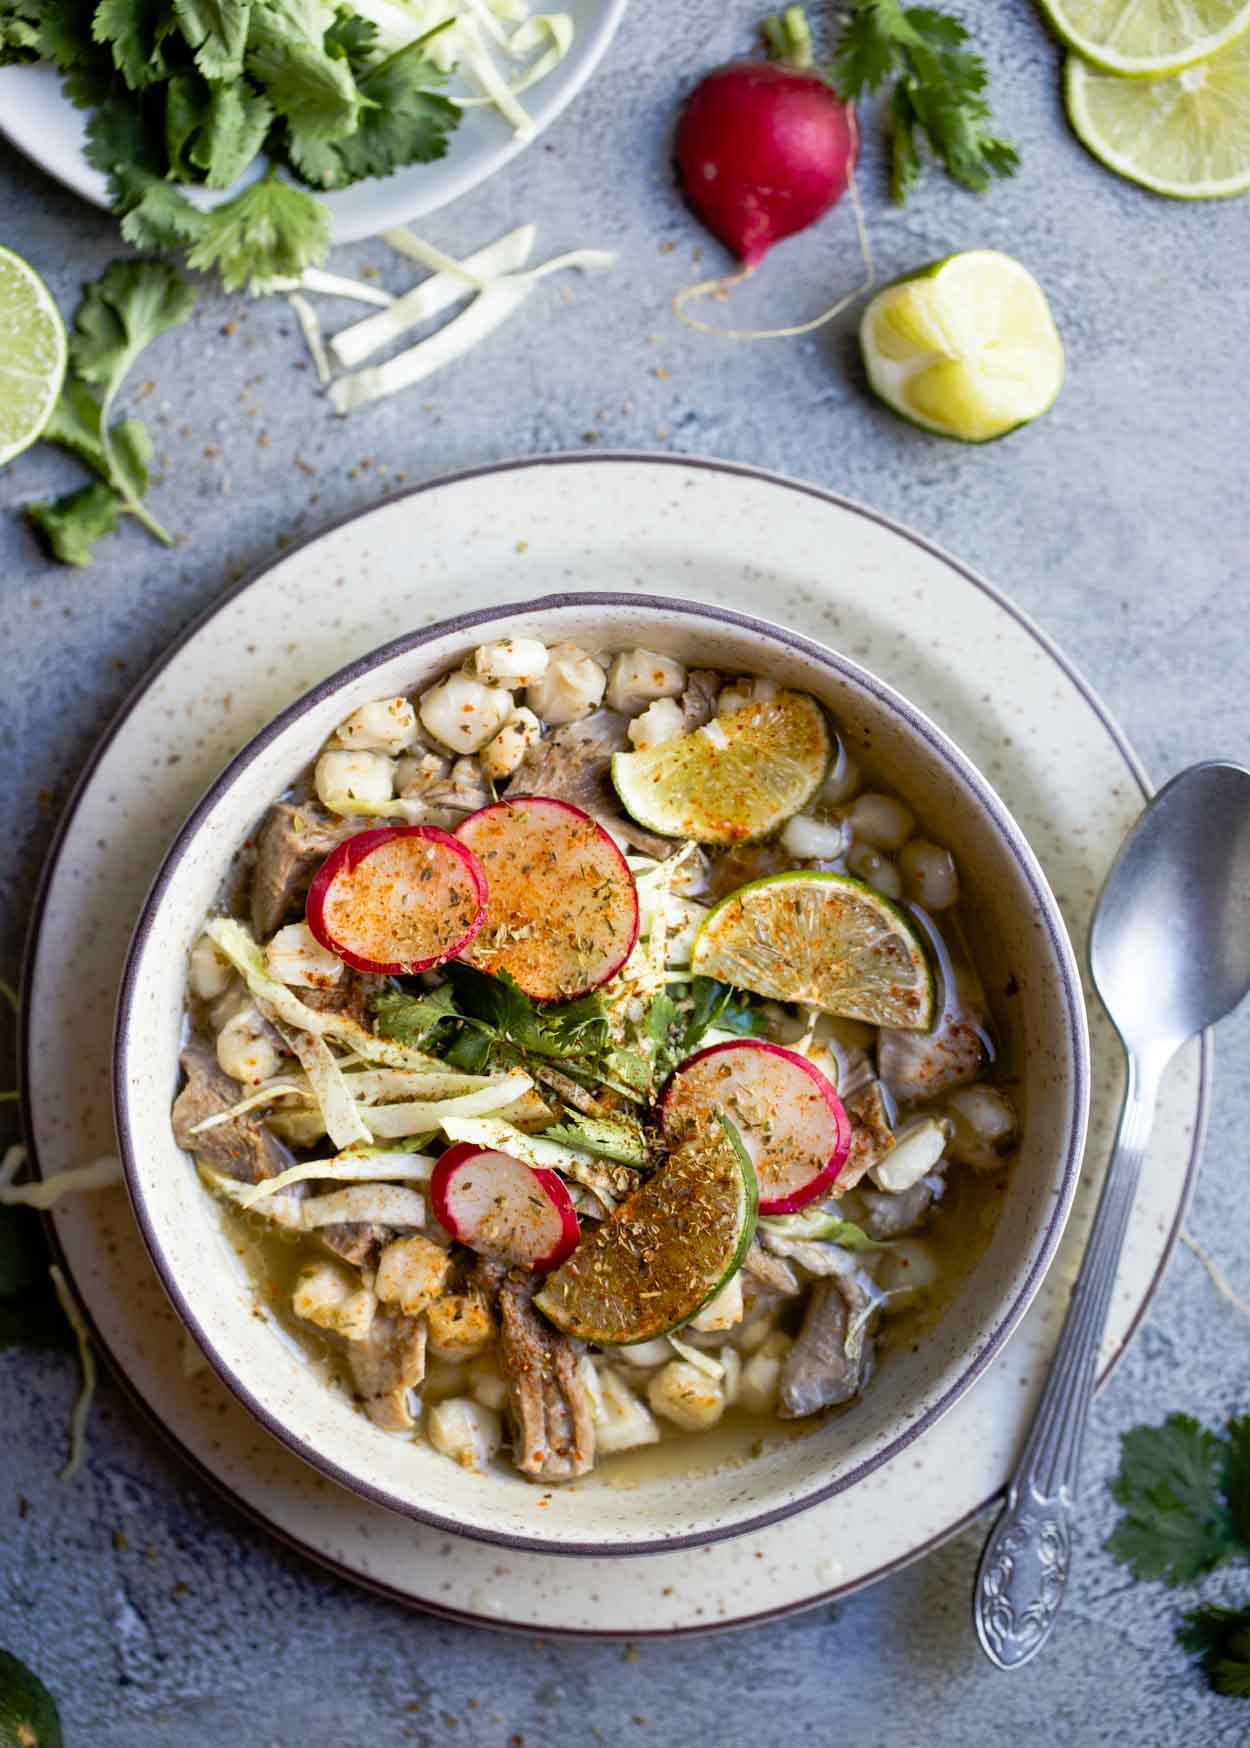 New Mexico posole soup in a beige bowl garnished with radishes, limes, and cabbage